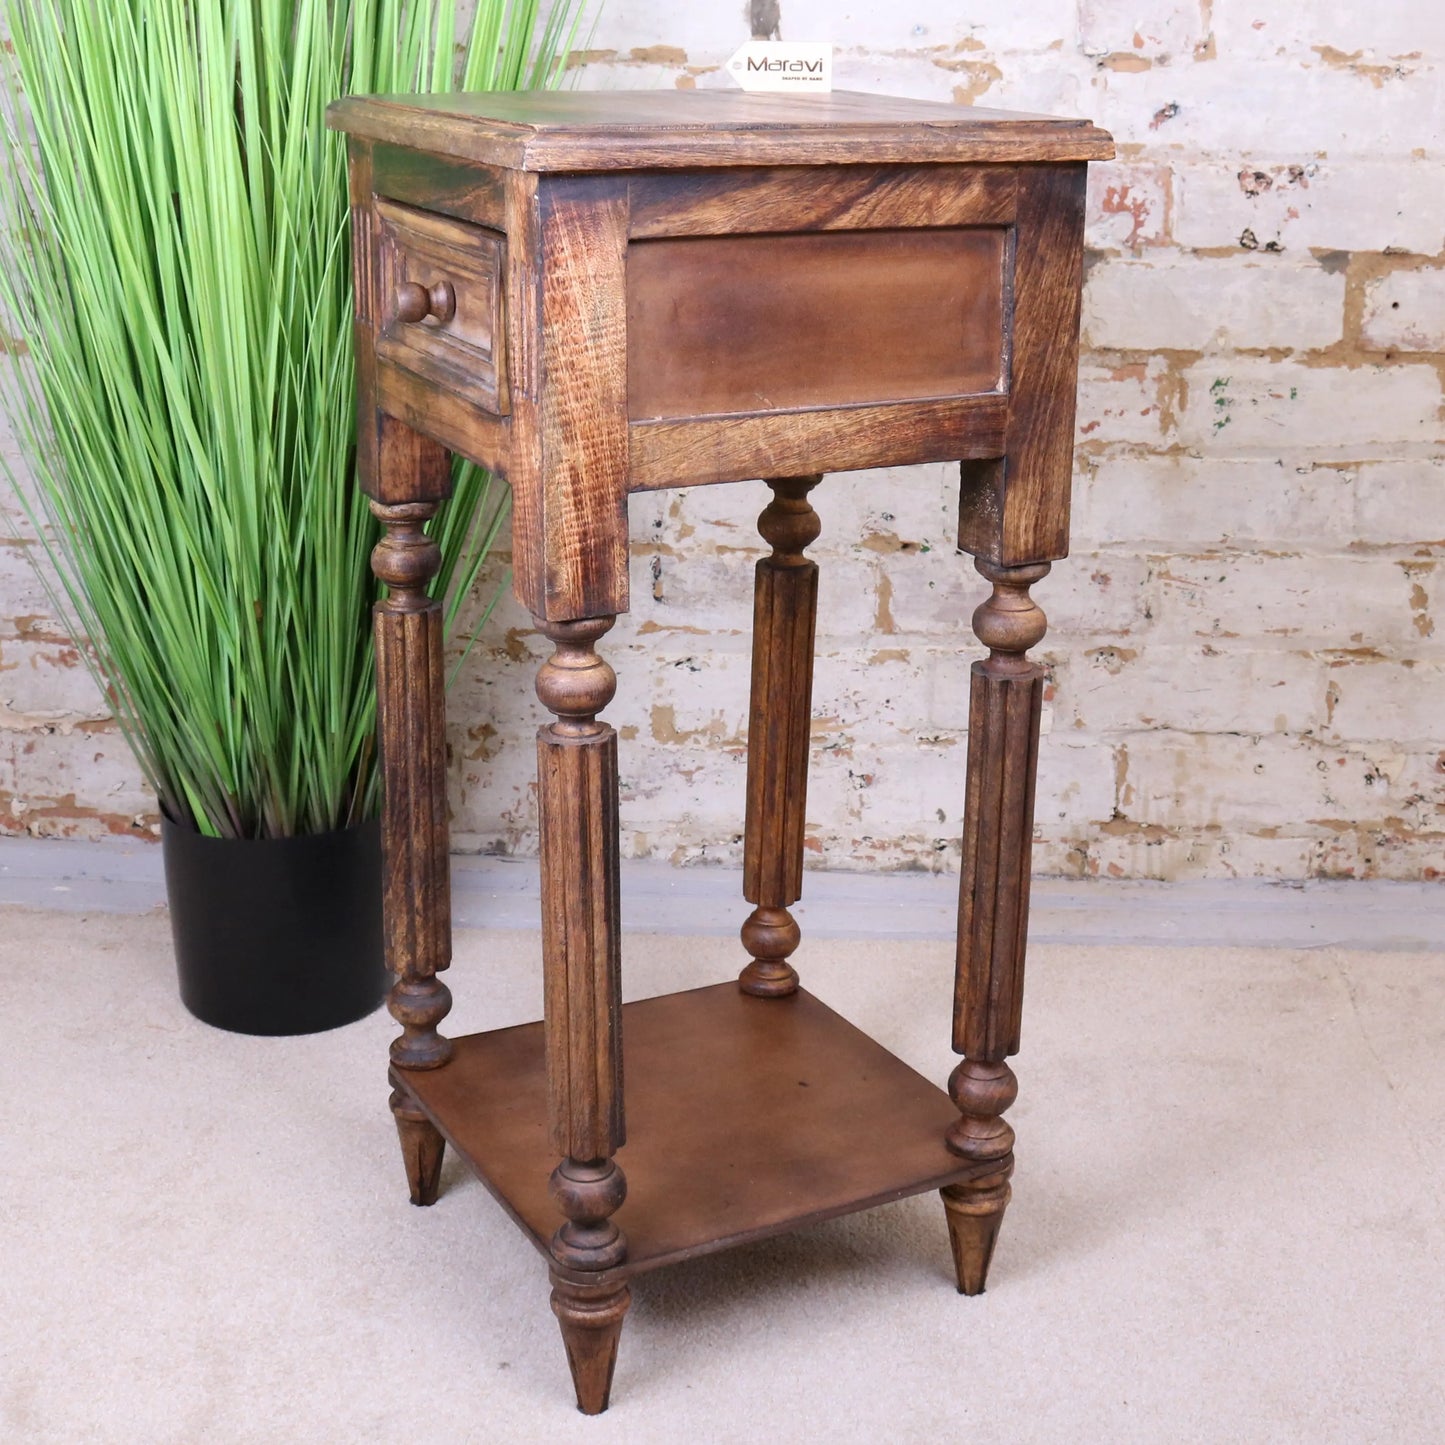 Toyani Square Tall Display Table Burnt Wood Side View